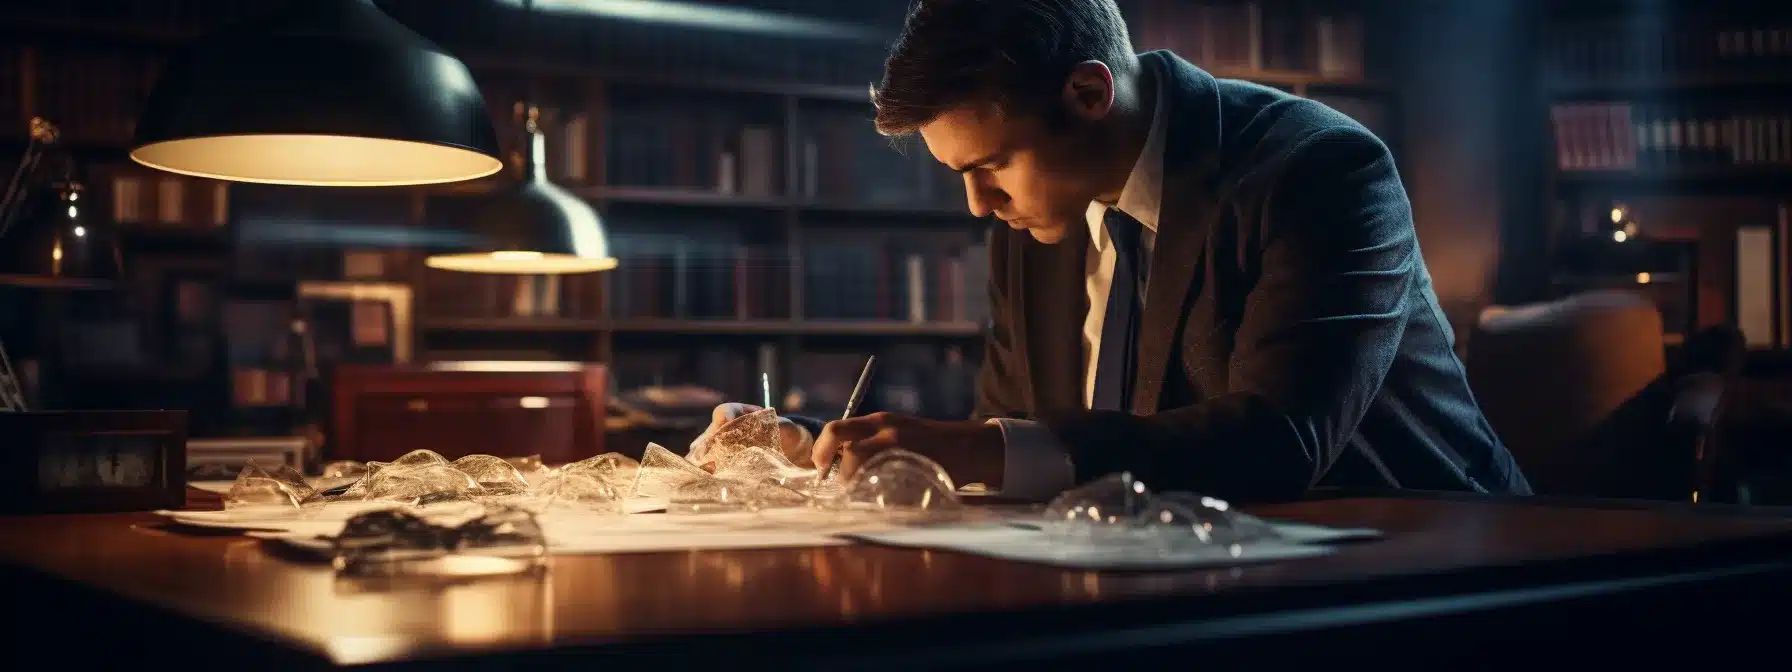 A Detective Examining A Case File With Magnifying Glass On A Desk Filled With Files And Papers.